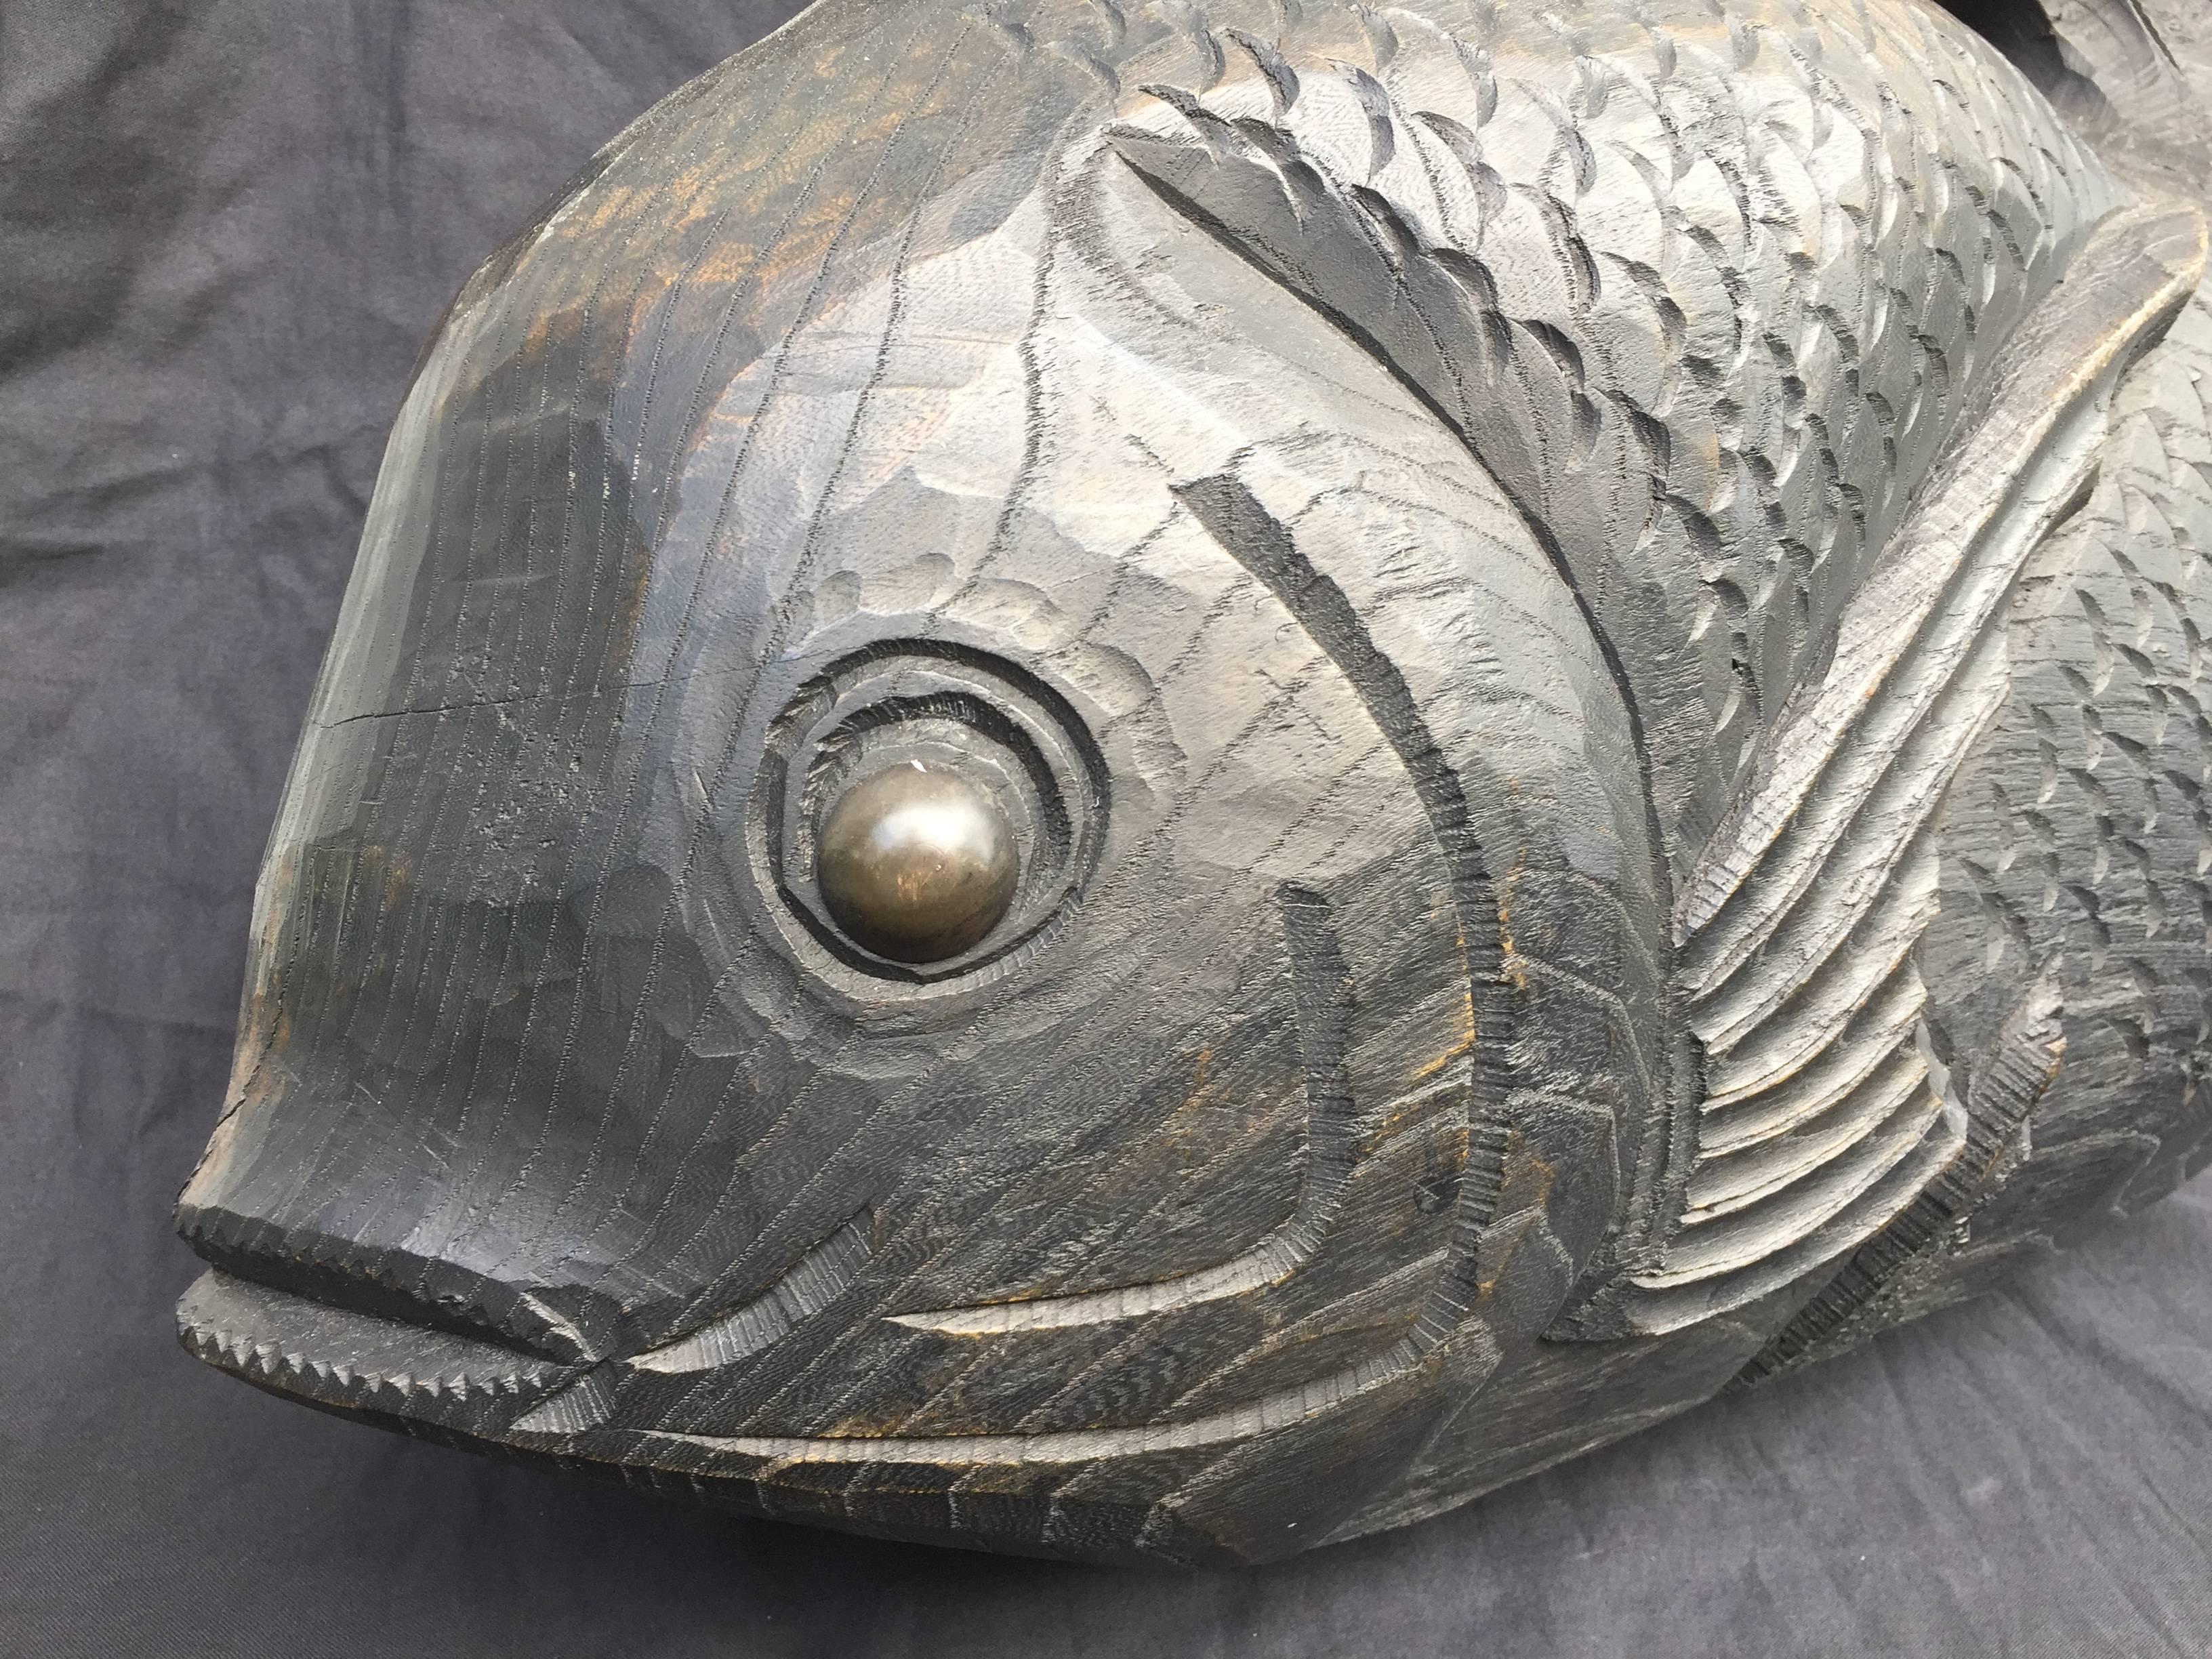 From Japan, a larger scale perfect display size of a Japanese hand-carved wooden Okimono (sculpture) of a Koi or snapper fish signed by artist Shinano kuni Inashi. 

Big beefy sculpture. Lovely carving for the most discriminating collection and